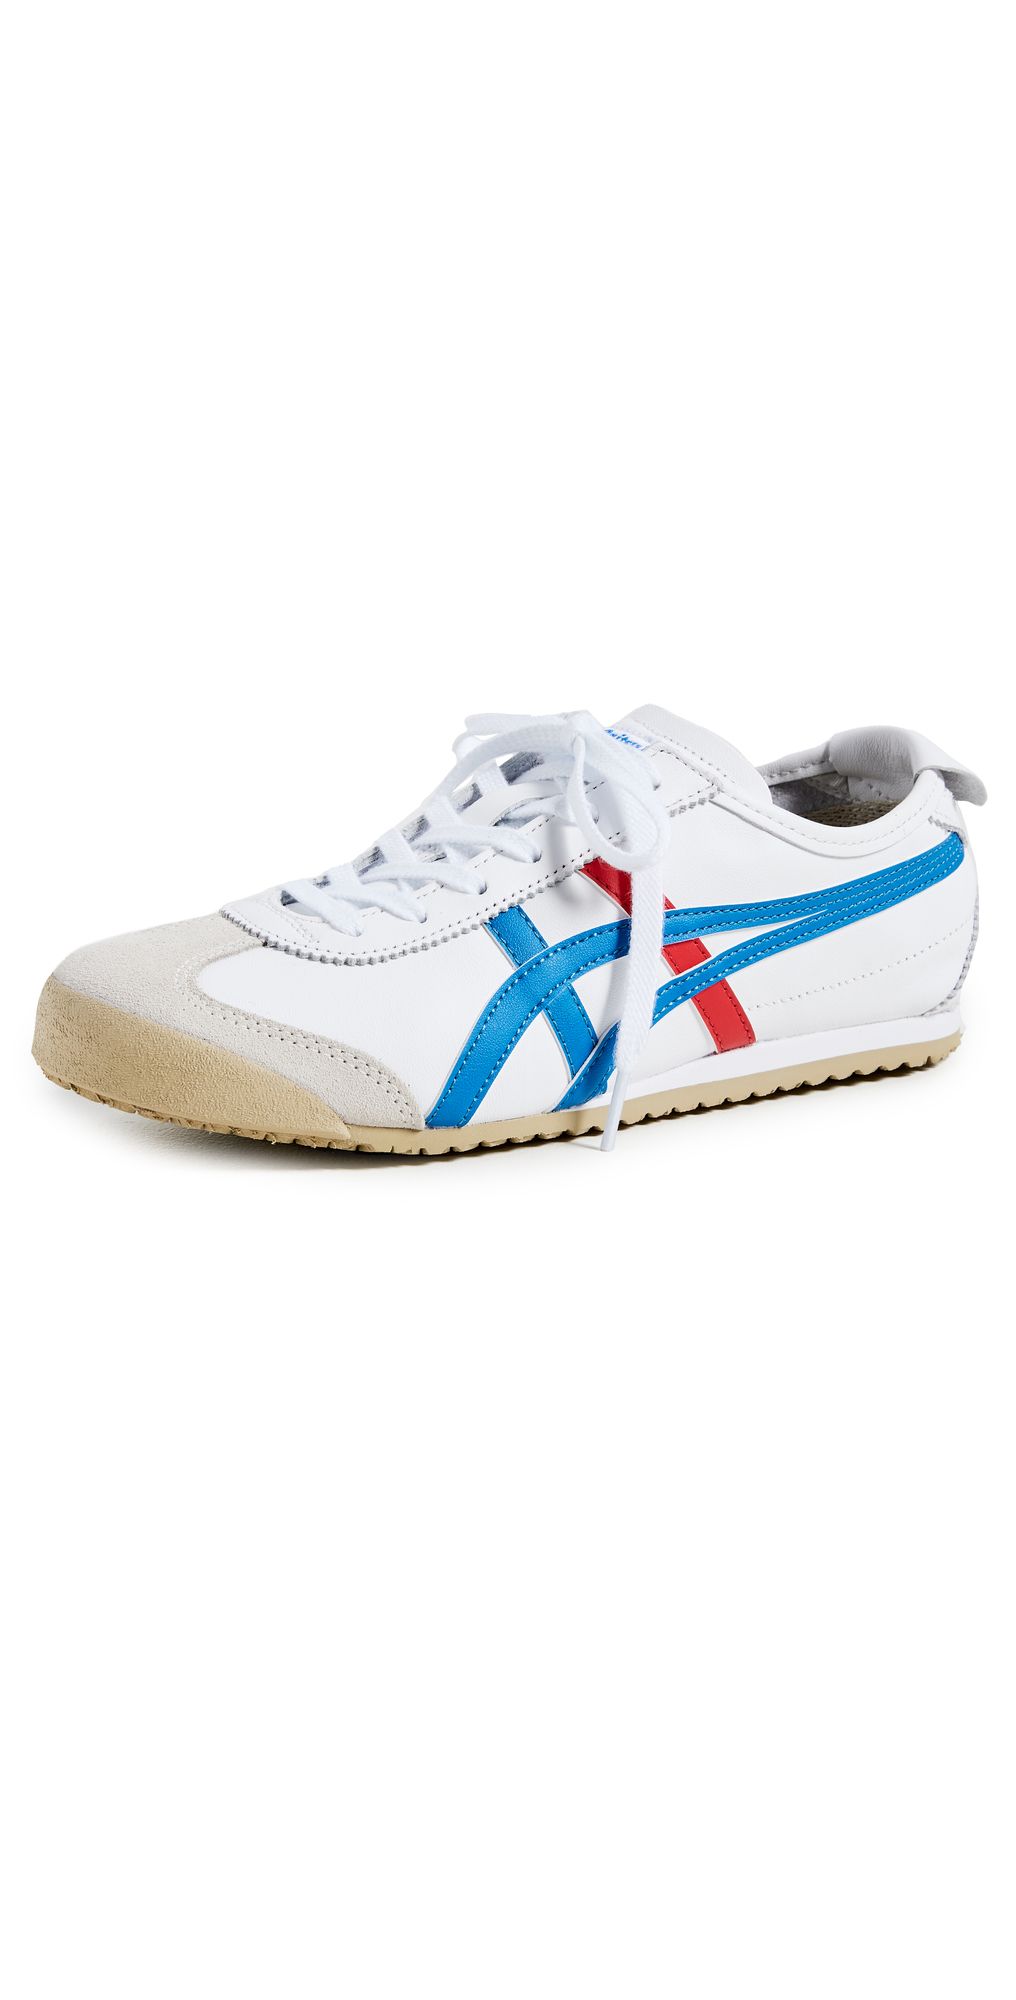 Onitsuka Tiger Mexico 66 Mid Runner Sneakers | Shopbop